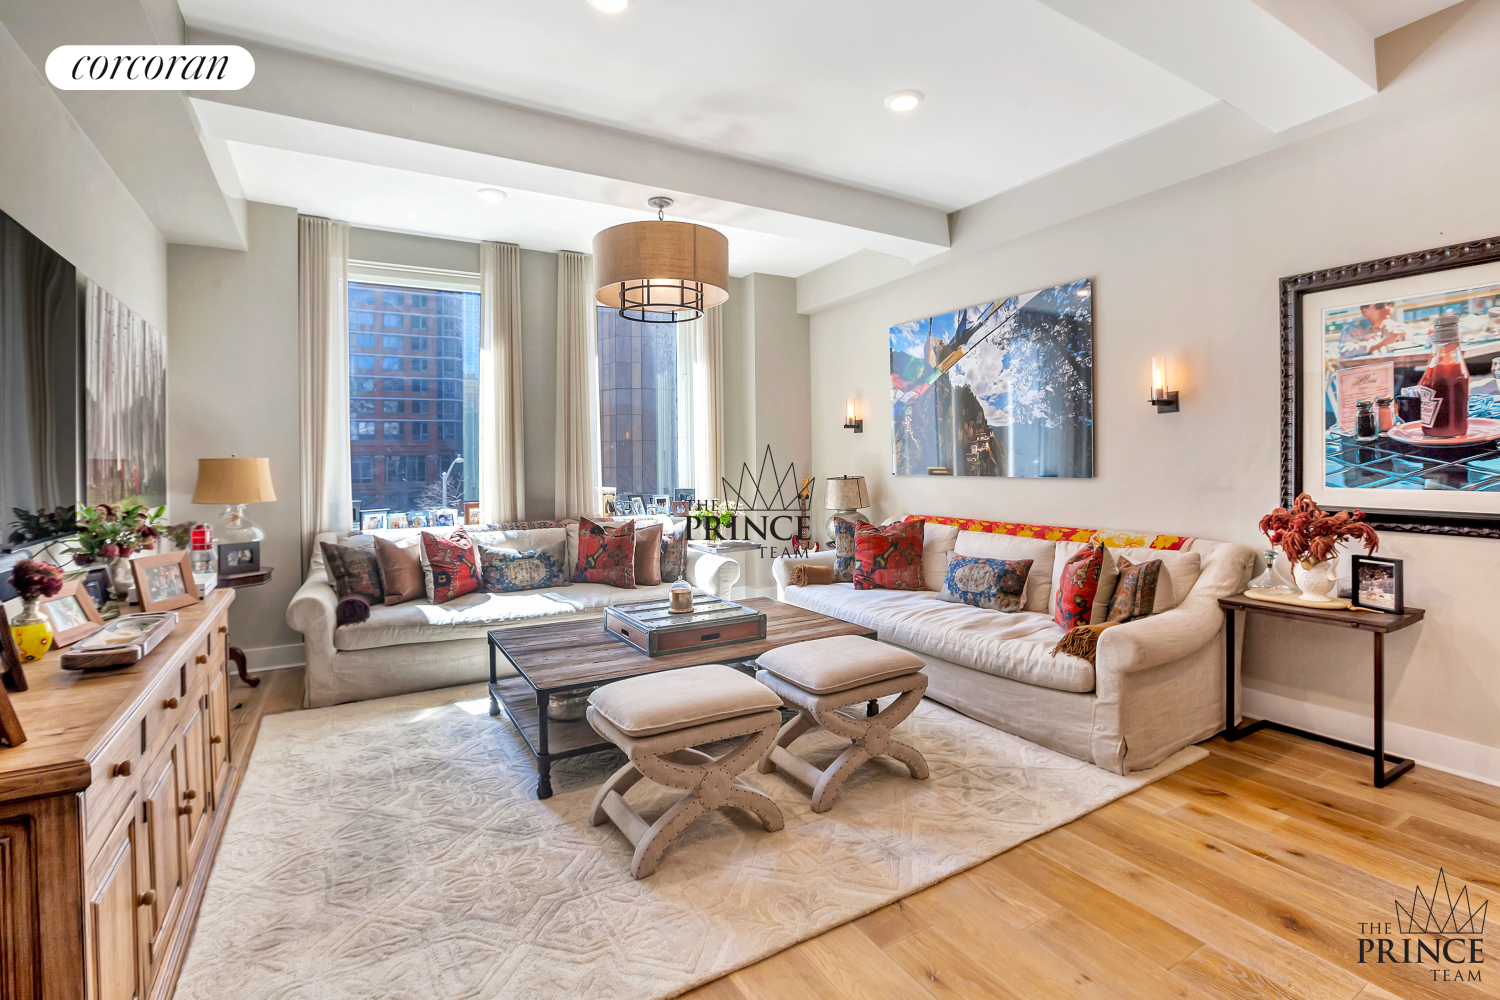 93 Worth Street 211, Tribeca, Downtown, NYC - 3 Bedrooms  
2 Bathrooms  
6 Rooms - 